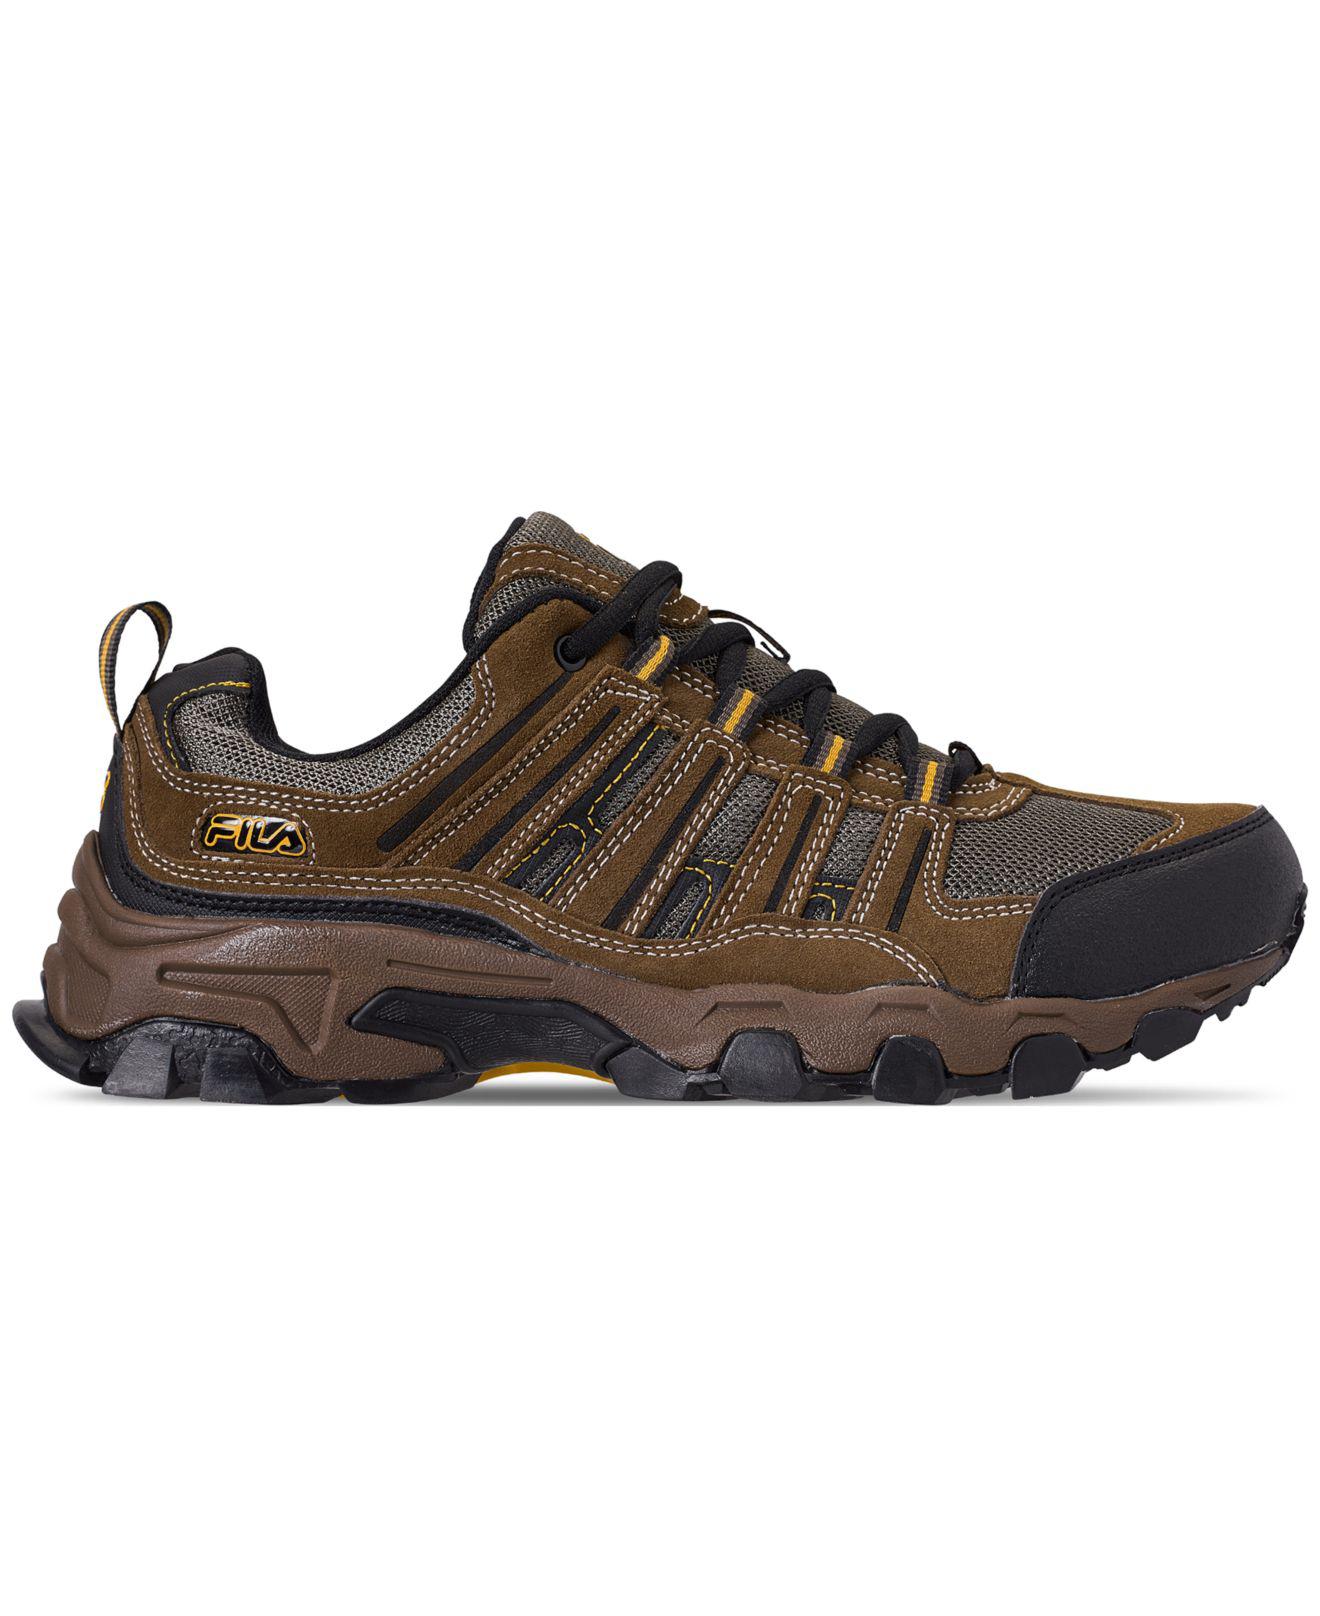 Fila Rubber Country Plus Casual Hiking Boots From Finish Line for Men - Lyst